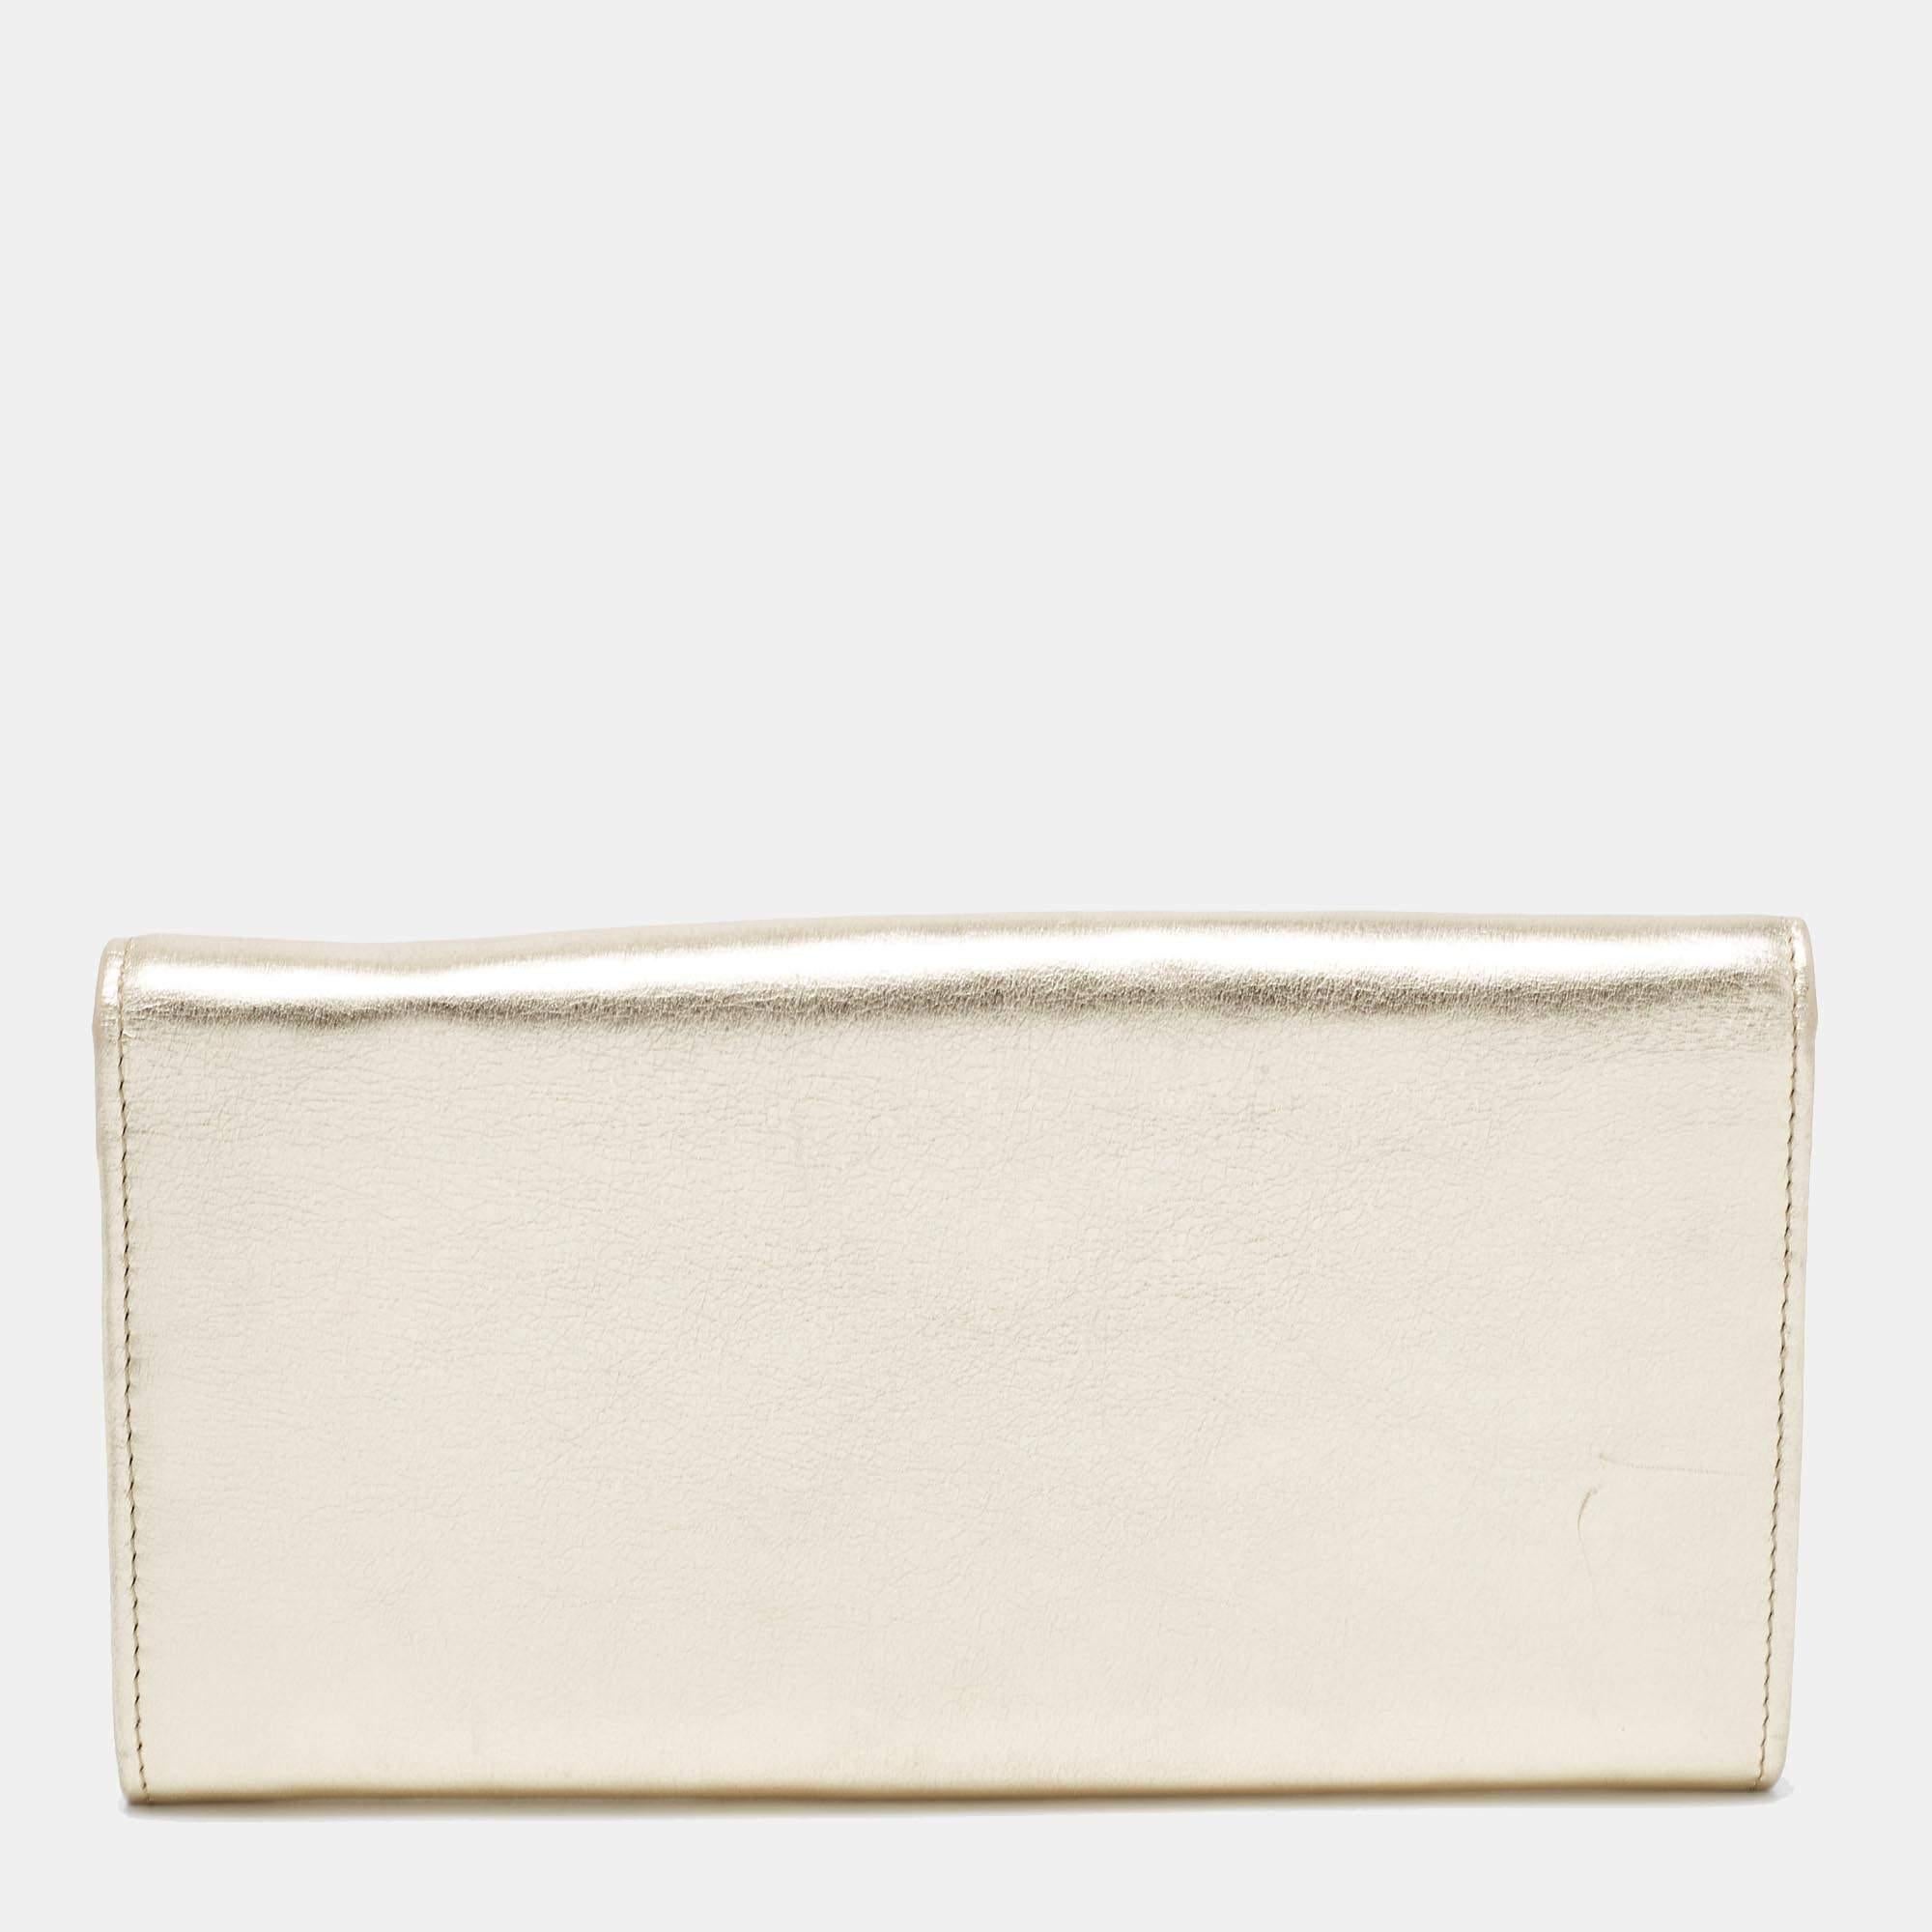 Ensure your essentials are in place with this continental wallet from Cartier. Crafted using gold leather, the wallet for women has a flap closure detailed with screw motifs from the brand's iconic Love bracelet. It is complete with a